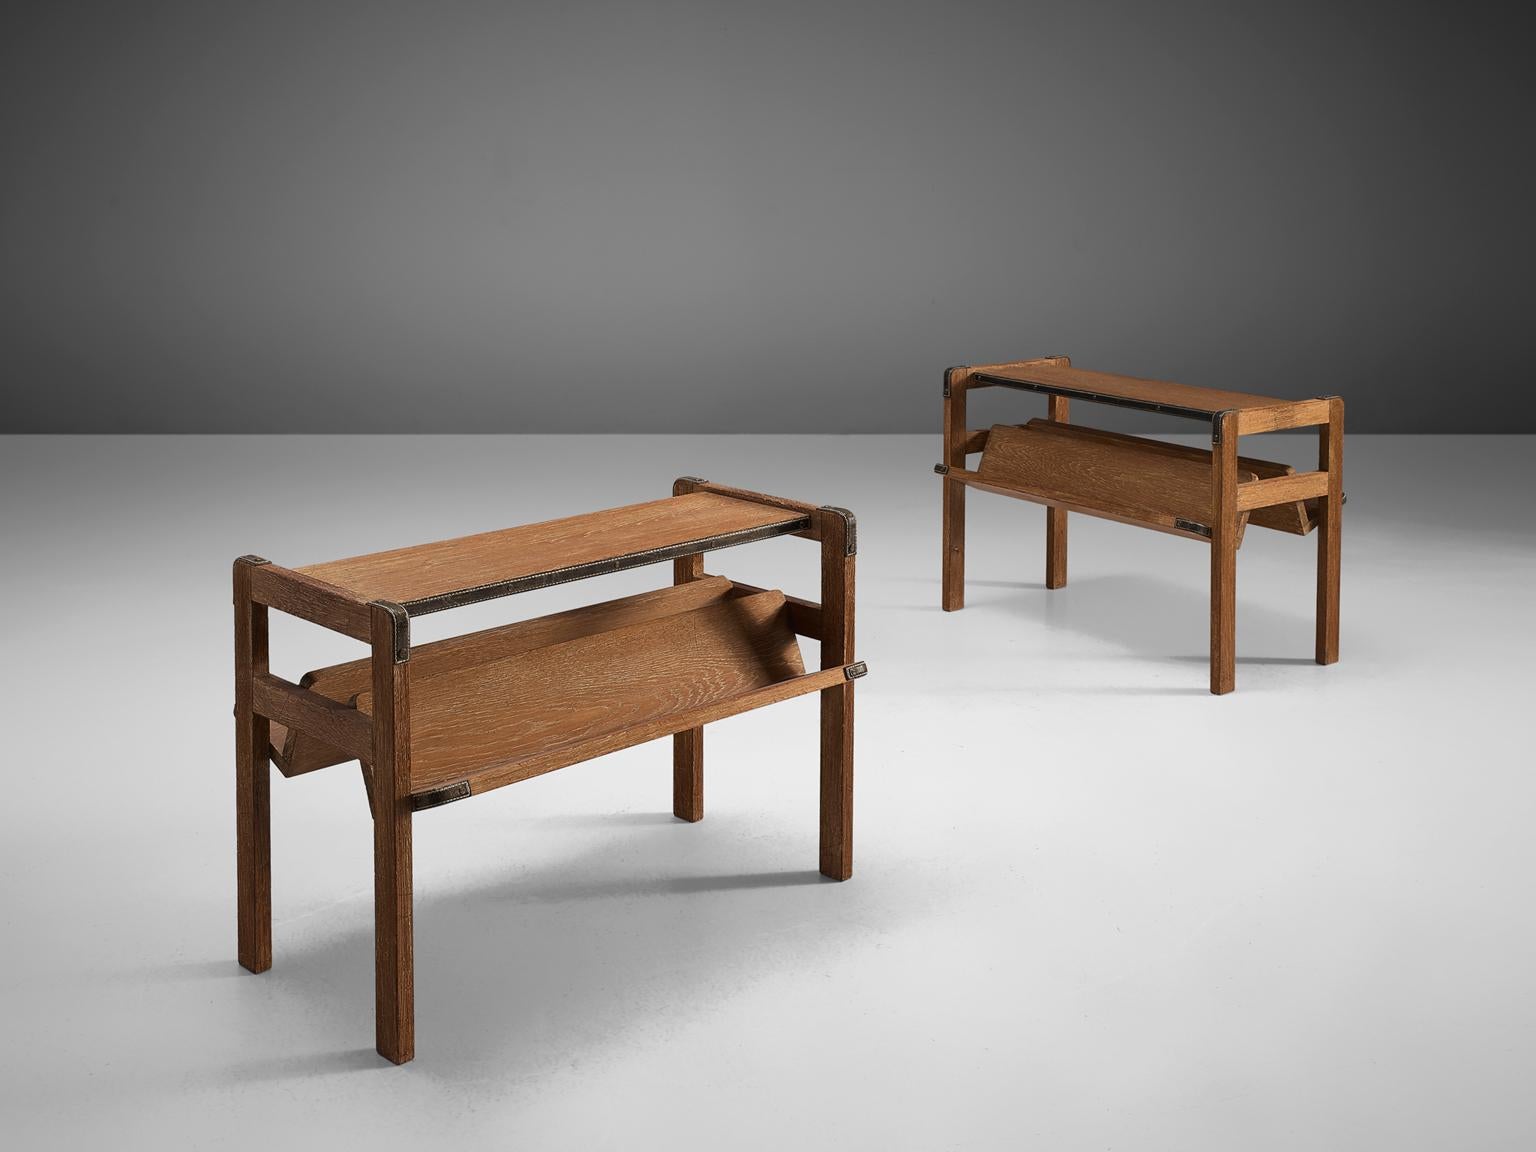 Jacques Adnet, pair of side tables, oak and leather, france, early 1930s

These coffee tables or side tables were designed in the beginning of the 1930s by Jacques Adnet, a well-known Art Deco and modernist designer. The set is composed of a solid